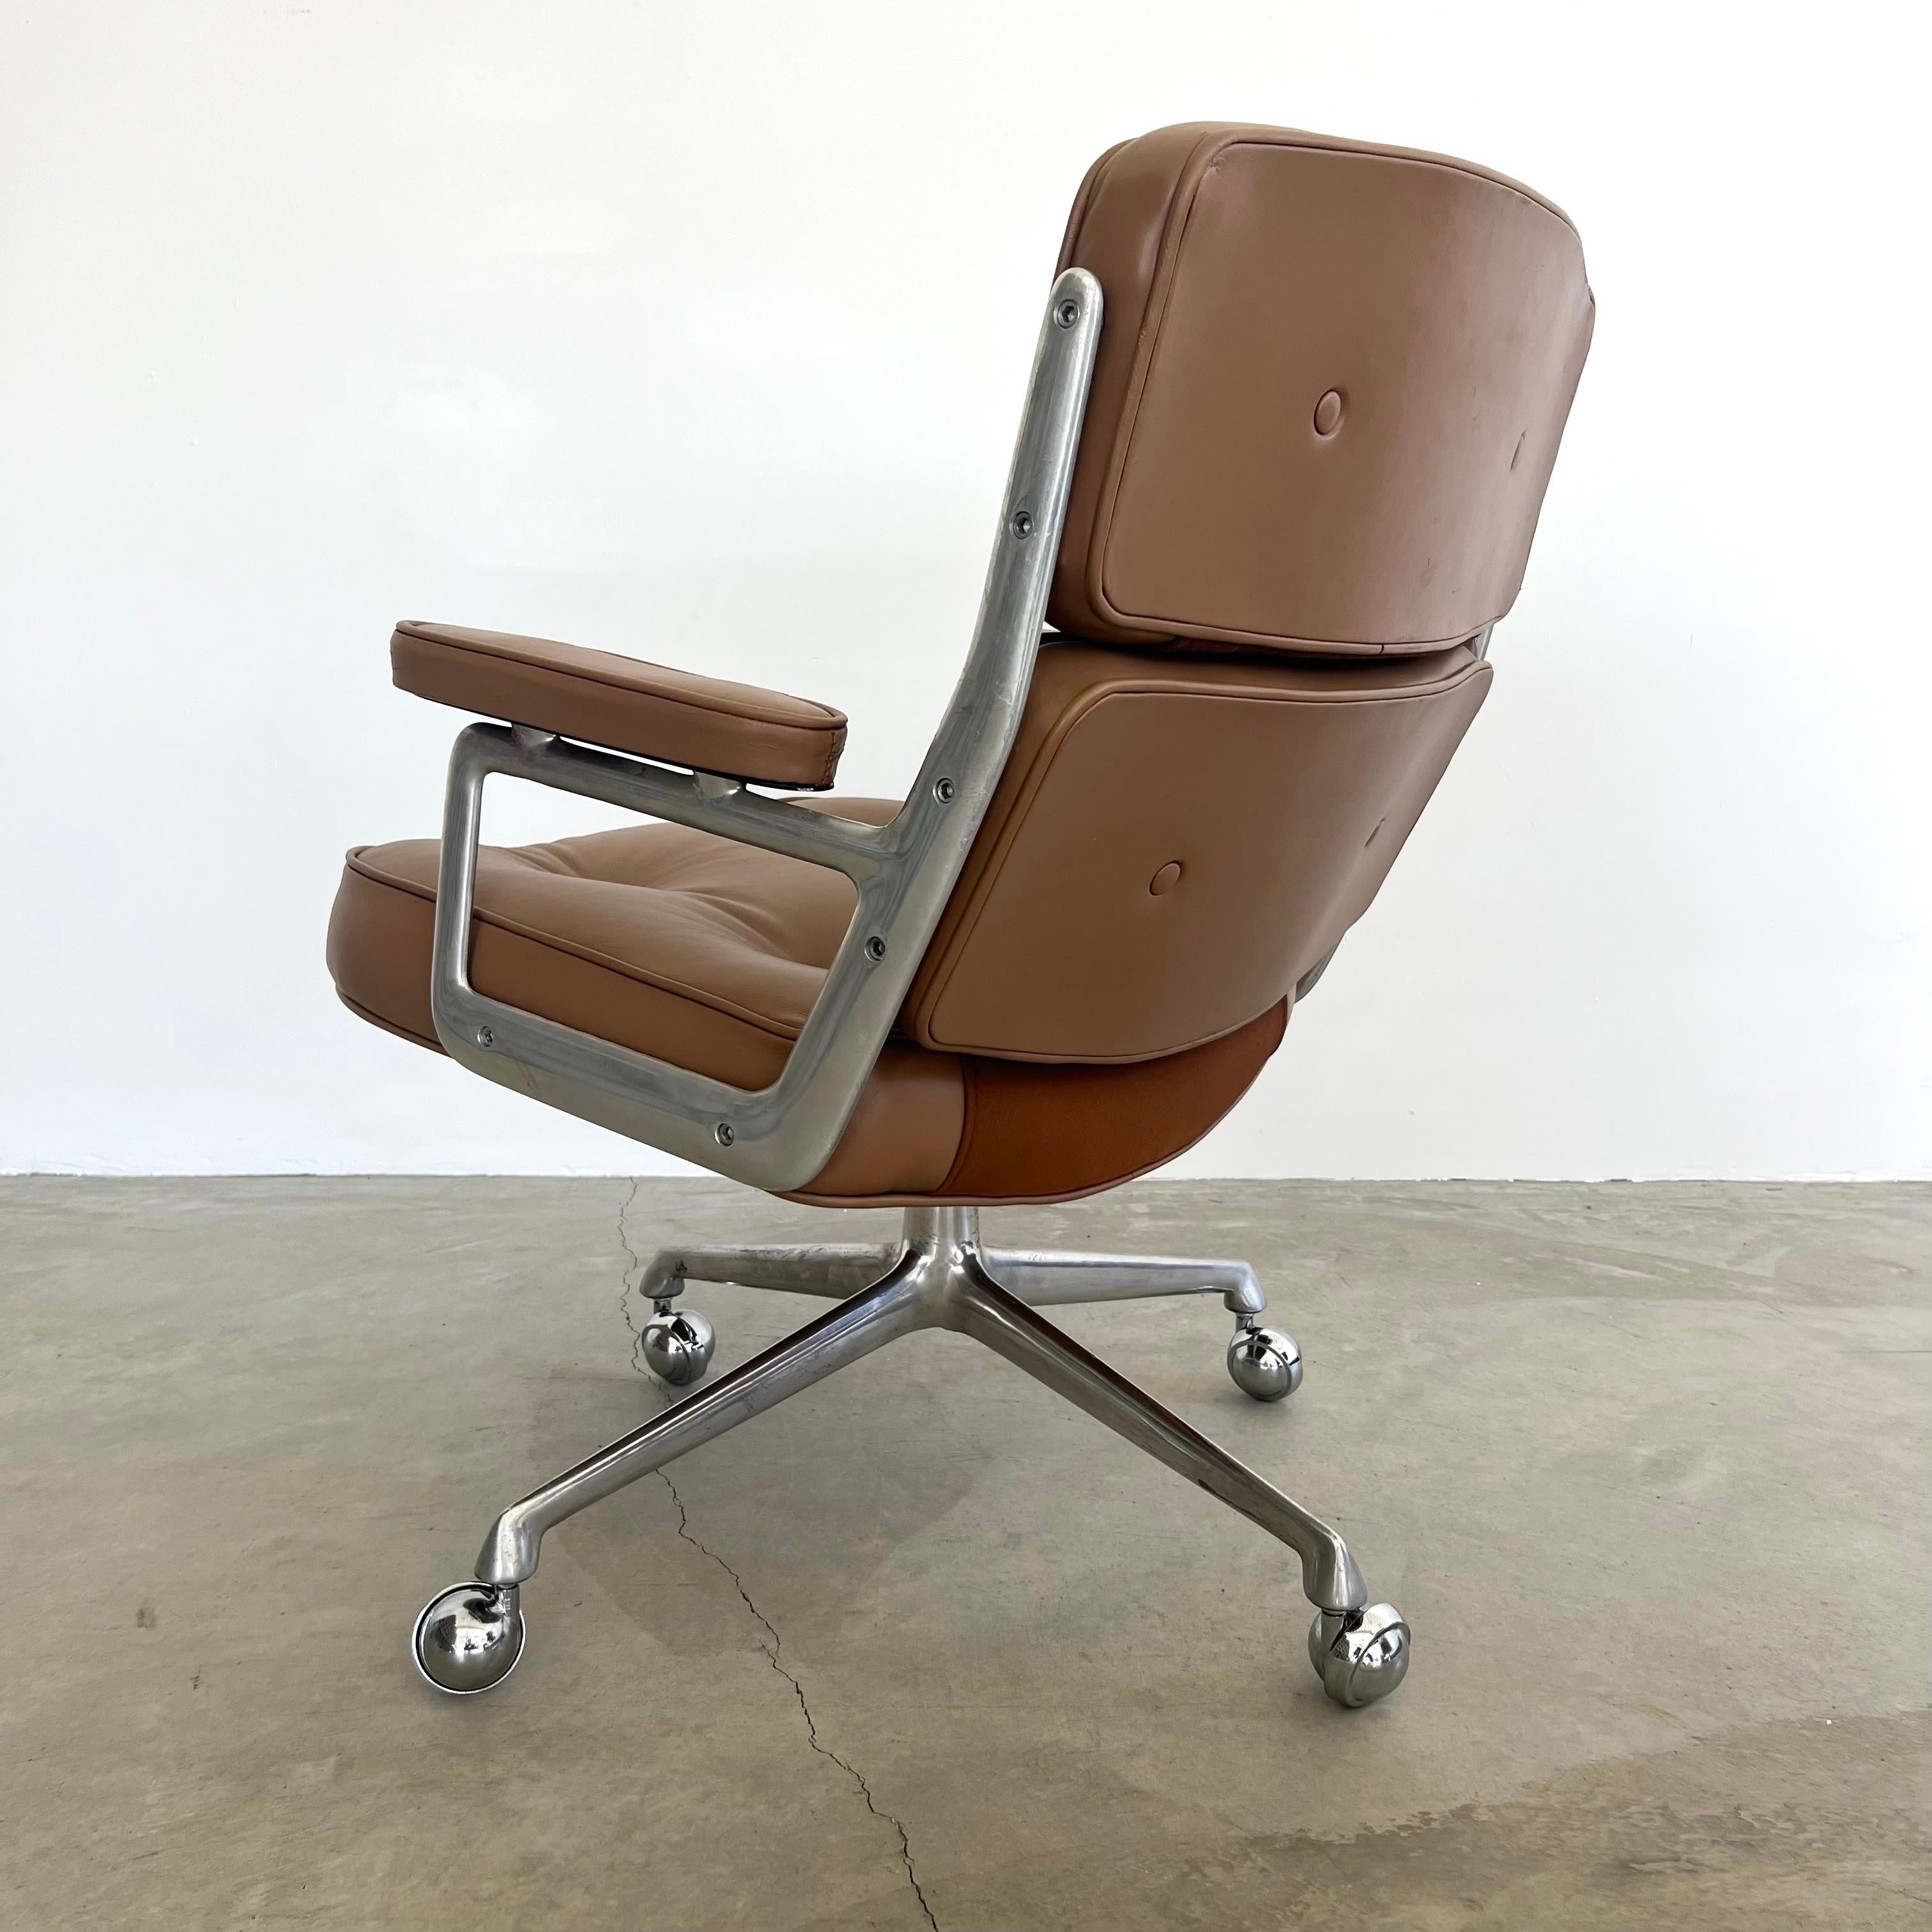 Aluminum Eames Time Life Chair in Tan Leather for Herman Miller, 1980s USA For Sale